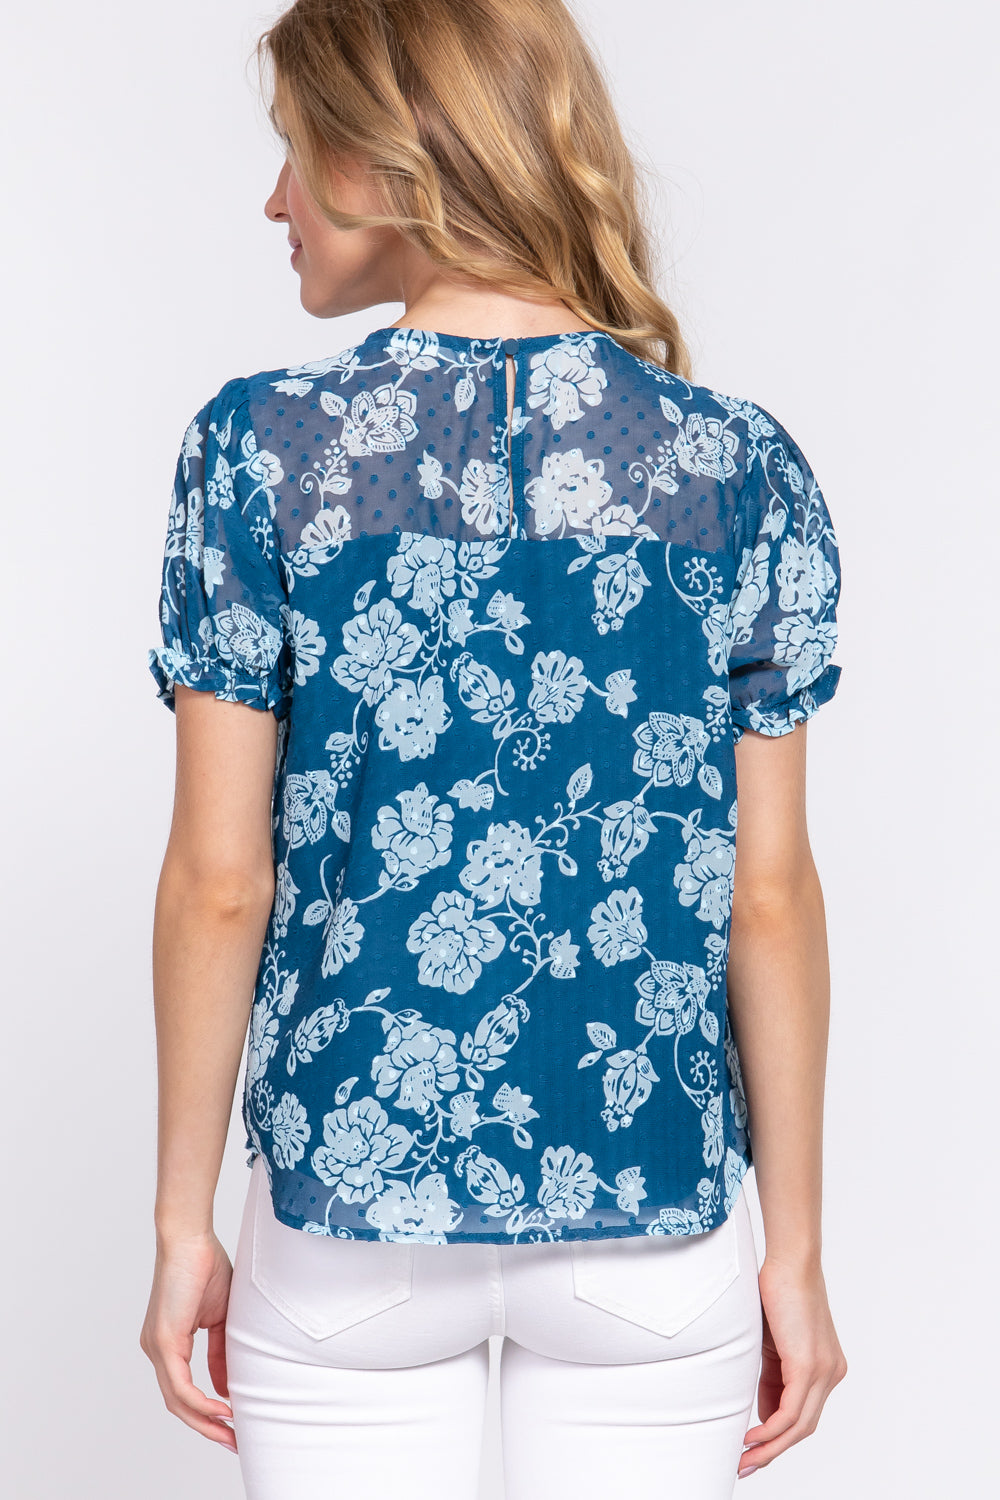 Floral Printed Clip Dot Blouse Top, Casual Wear with Short Puffed Sleeves, Navy Blue - Small